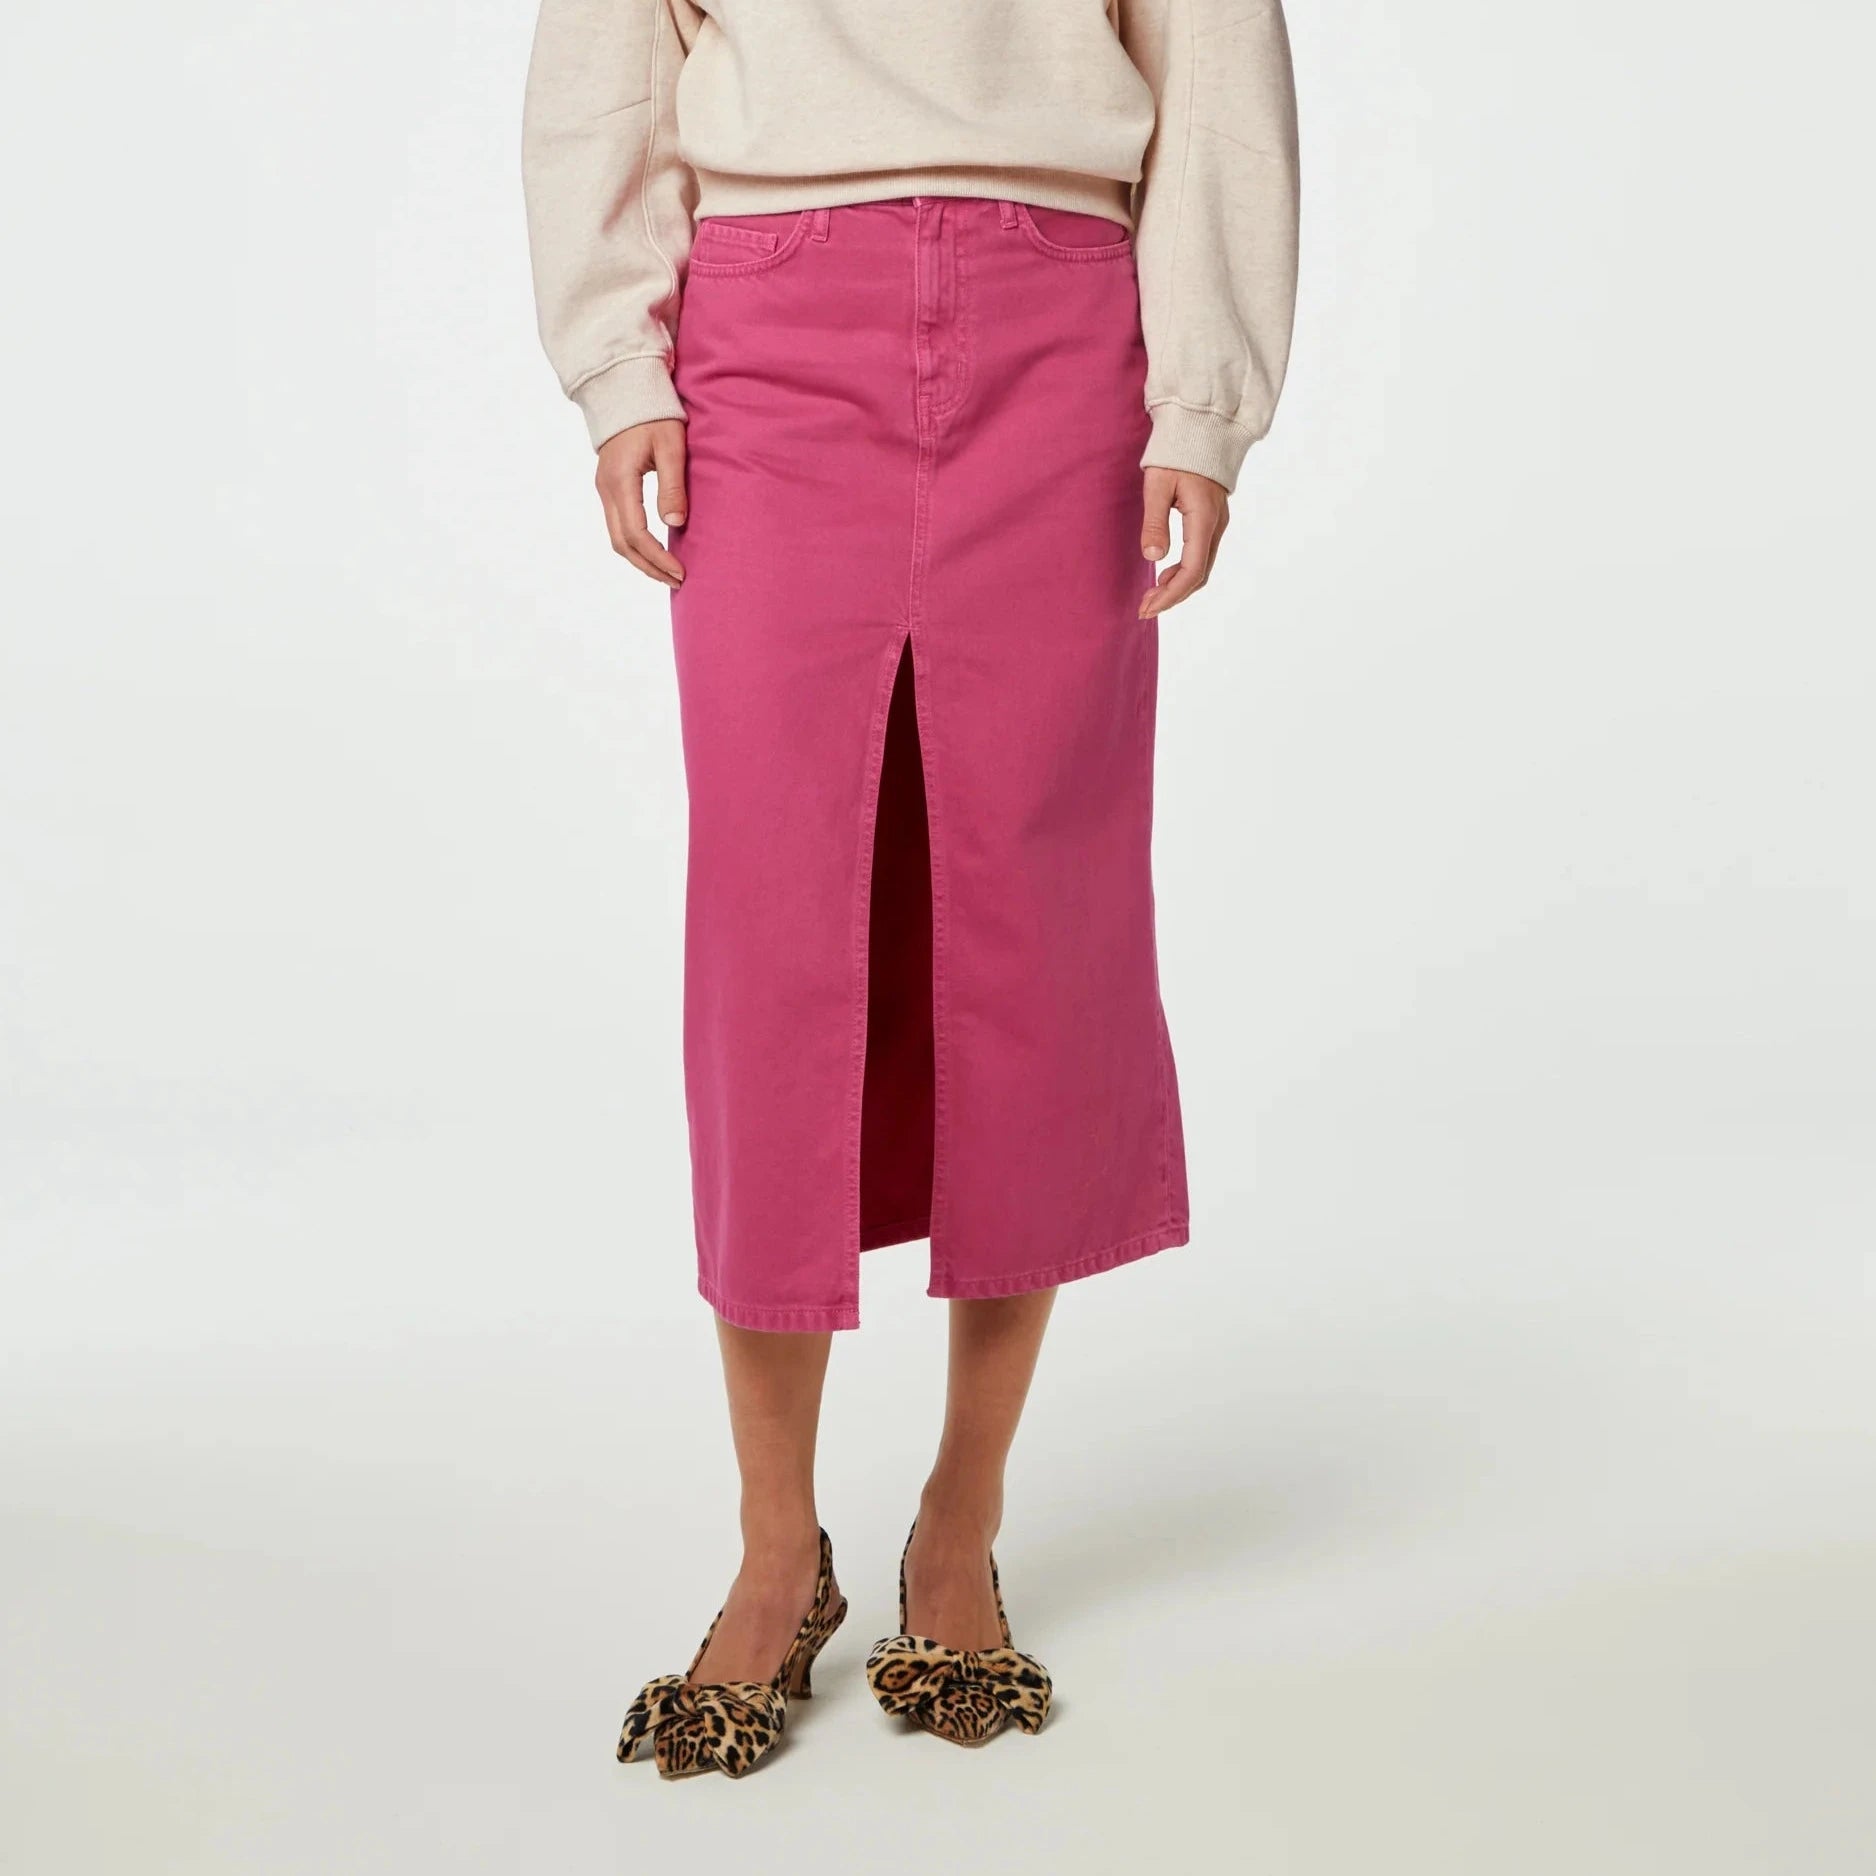 Woman modeling a casual outfit featuring a beige sweatshirt, midi denim Carlyne Skirt in hot pink, and leopard print shoes has been updated to: Woman modeling a casual outfit featuring a beige sweatshirt, midi denim Carlyne Skirt in hot pink by Fabienne Chapot.